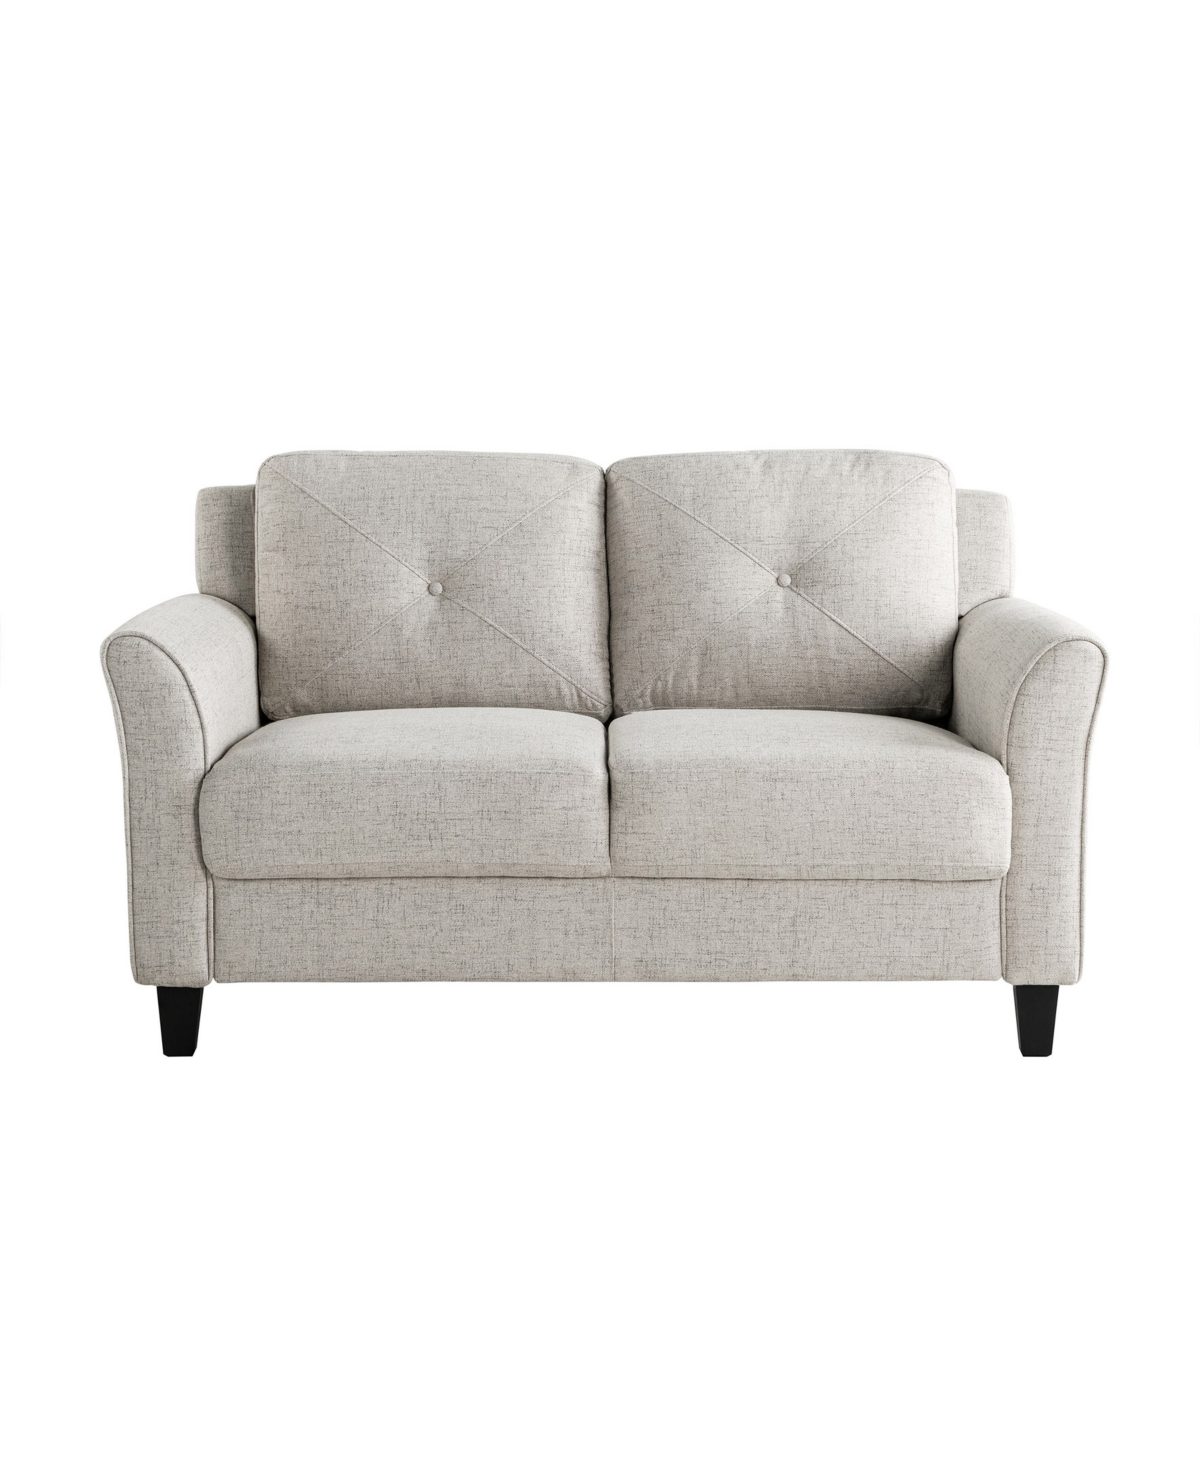 Lifestyle Solutions 56.3" Polyester Harvard Loveseat With Curved Arms In Beige